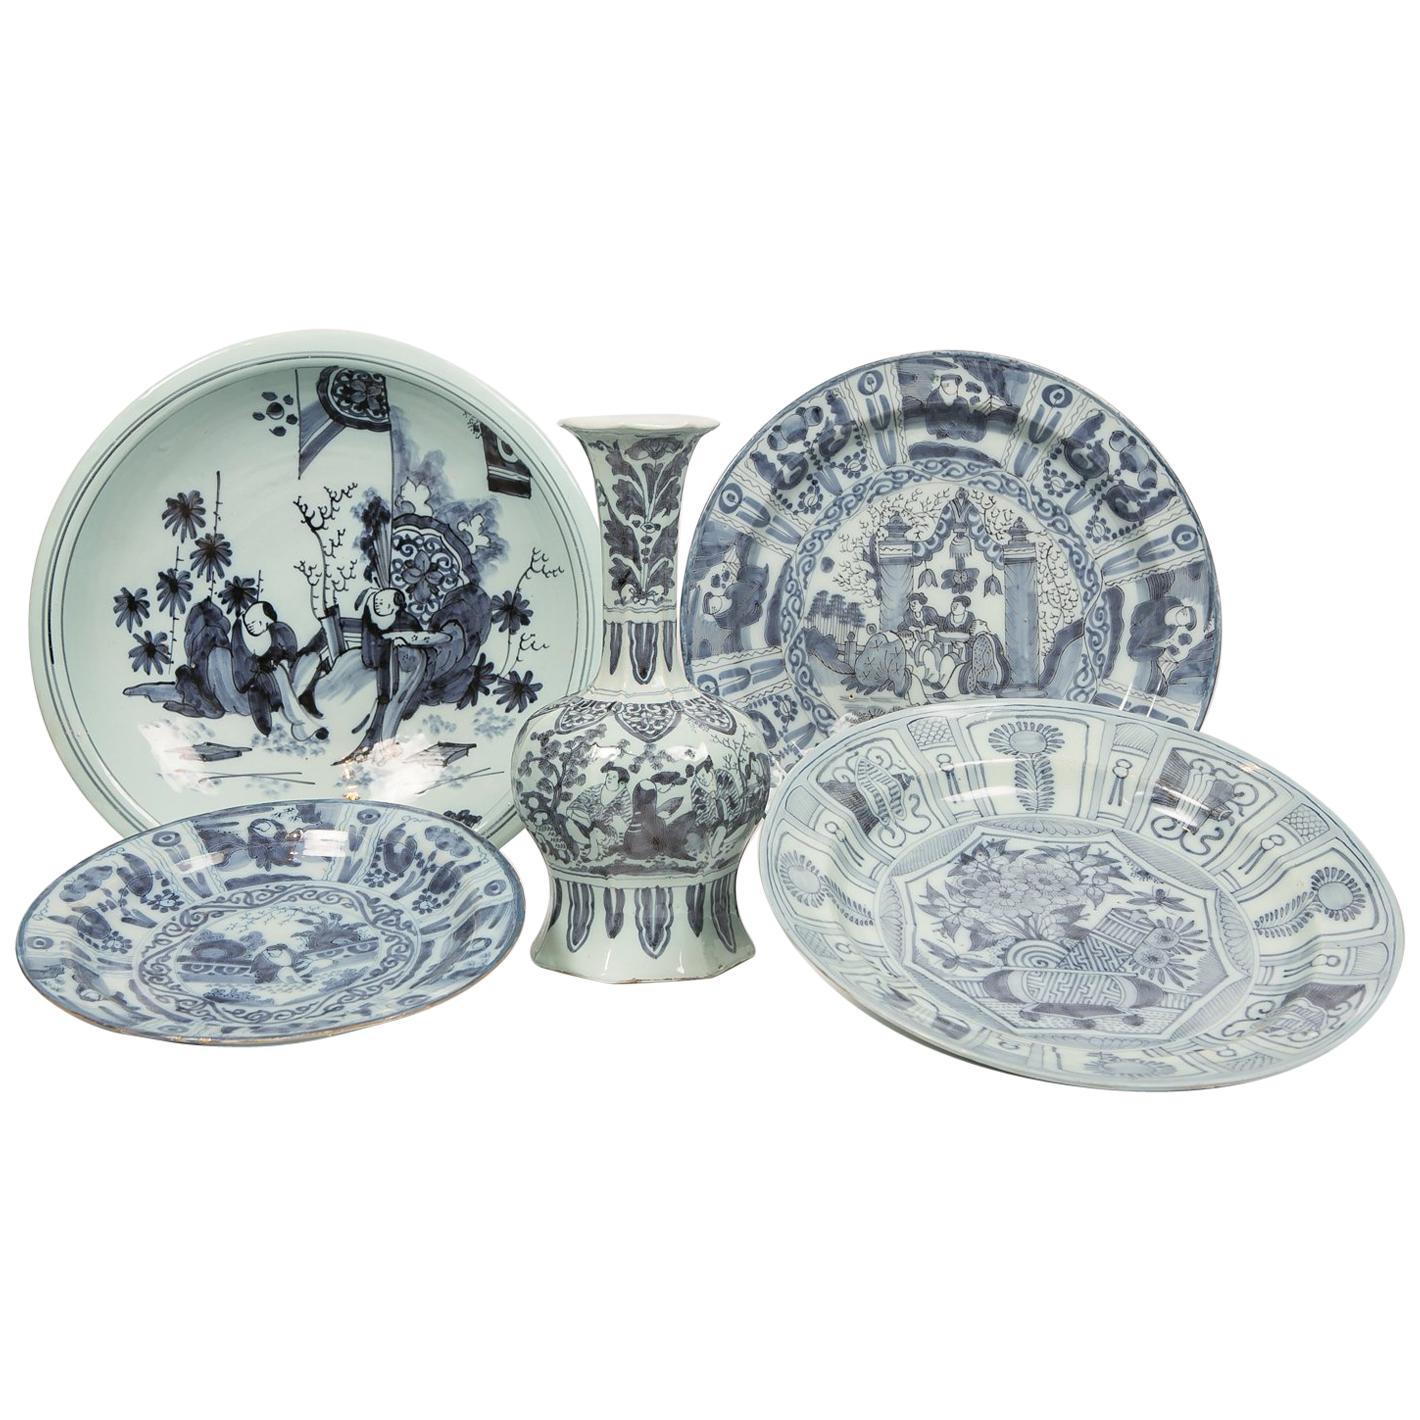 Collection of Antique Delft with Chinoiserie Decoration Early 18th Century